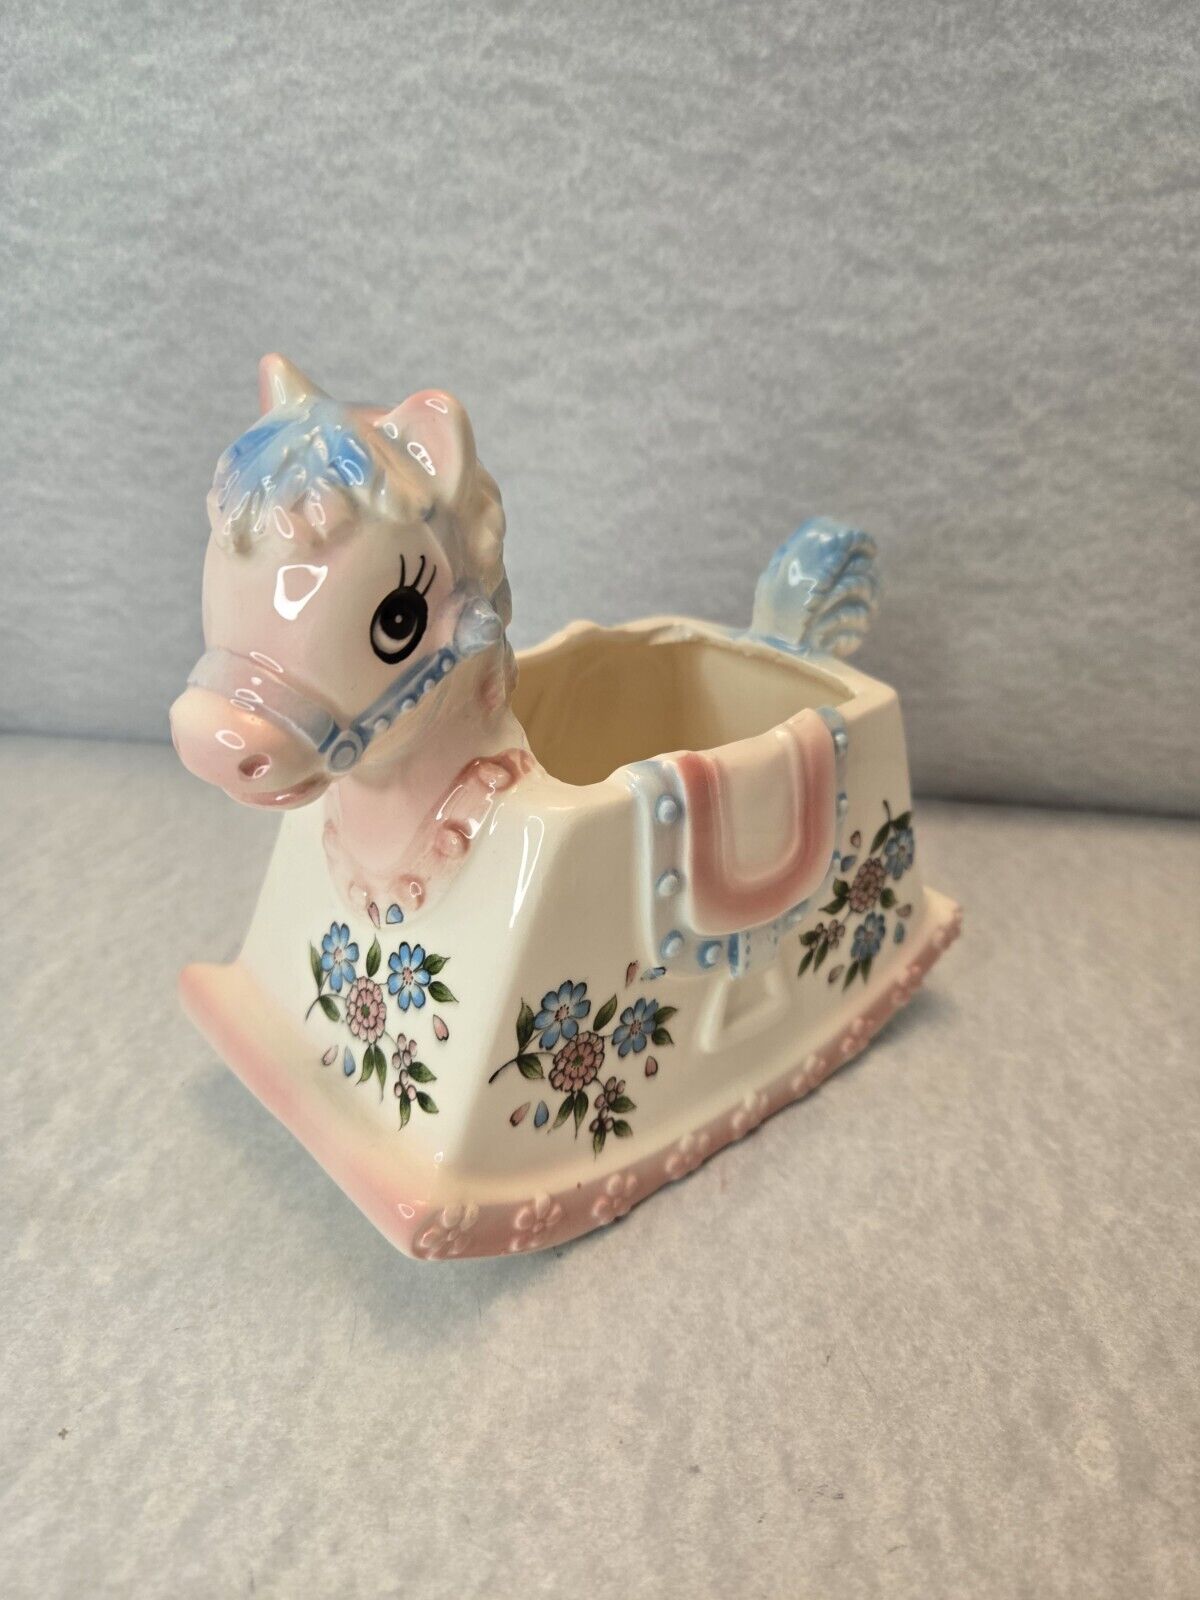 Vintage Nursery Baby Planter Rocking Horse Inarco Made In Japan Baby Decor Gift